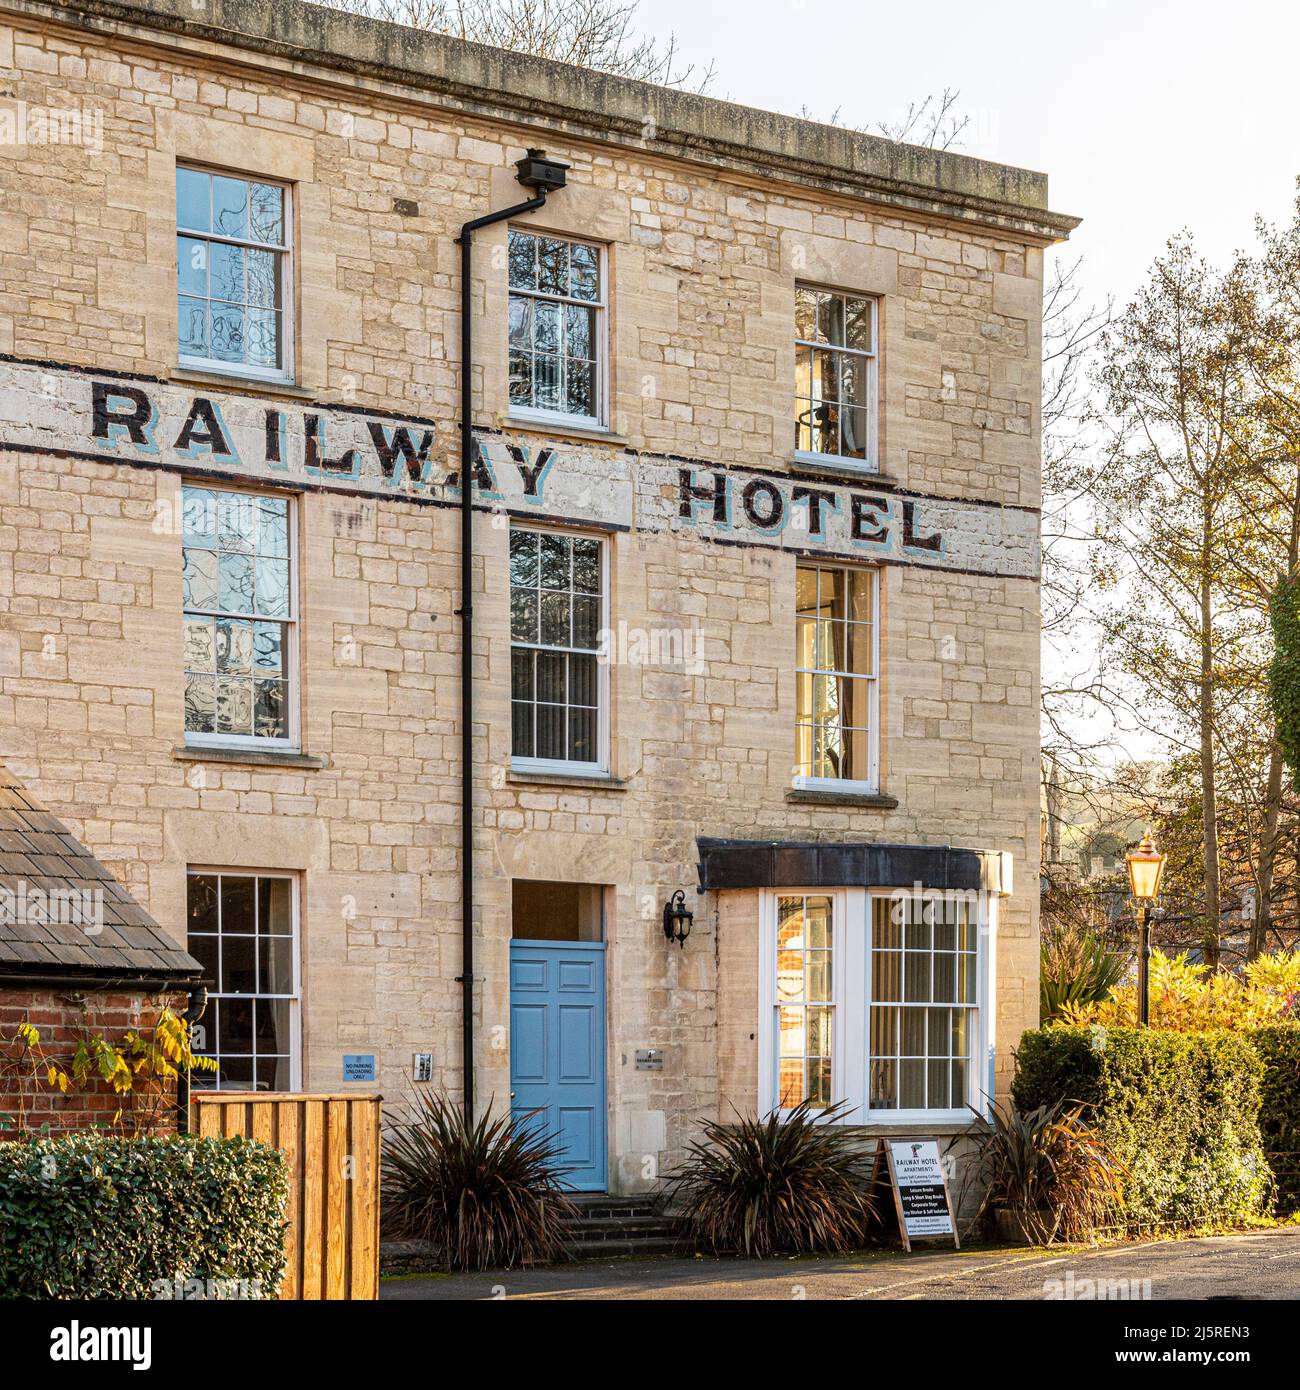 The old Railway Hotel (now converted into luxury appartments) in the small town of Nailsworth in the Stroud Valleys, Gloucestershire, England UK Stock Photo